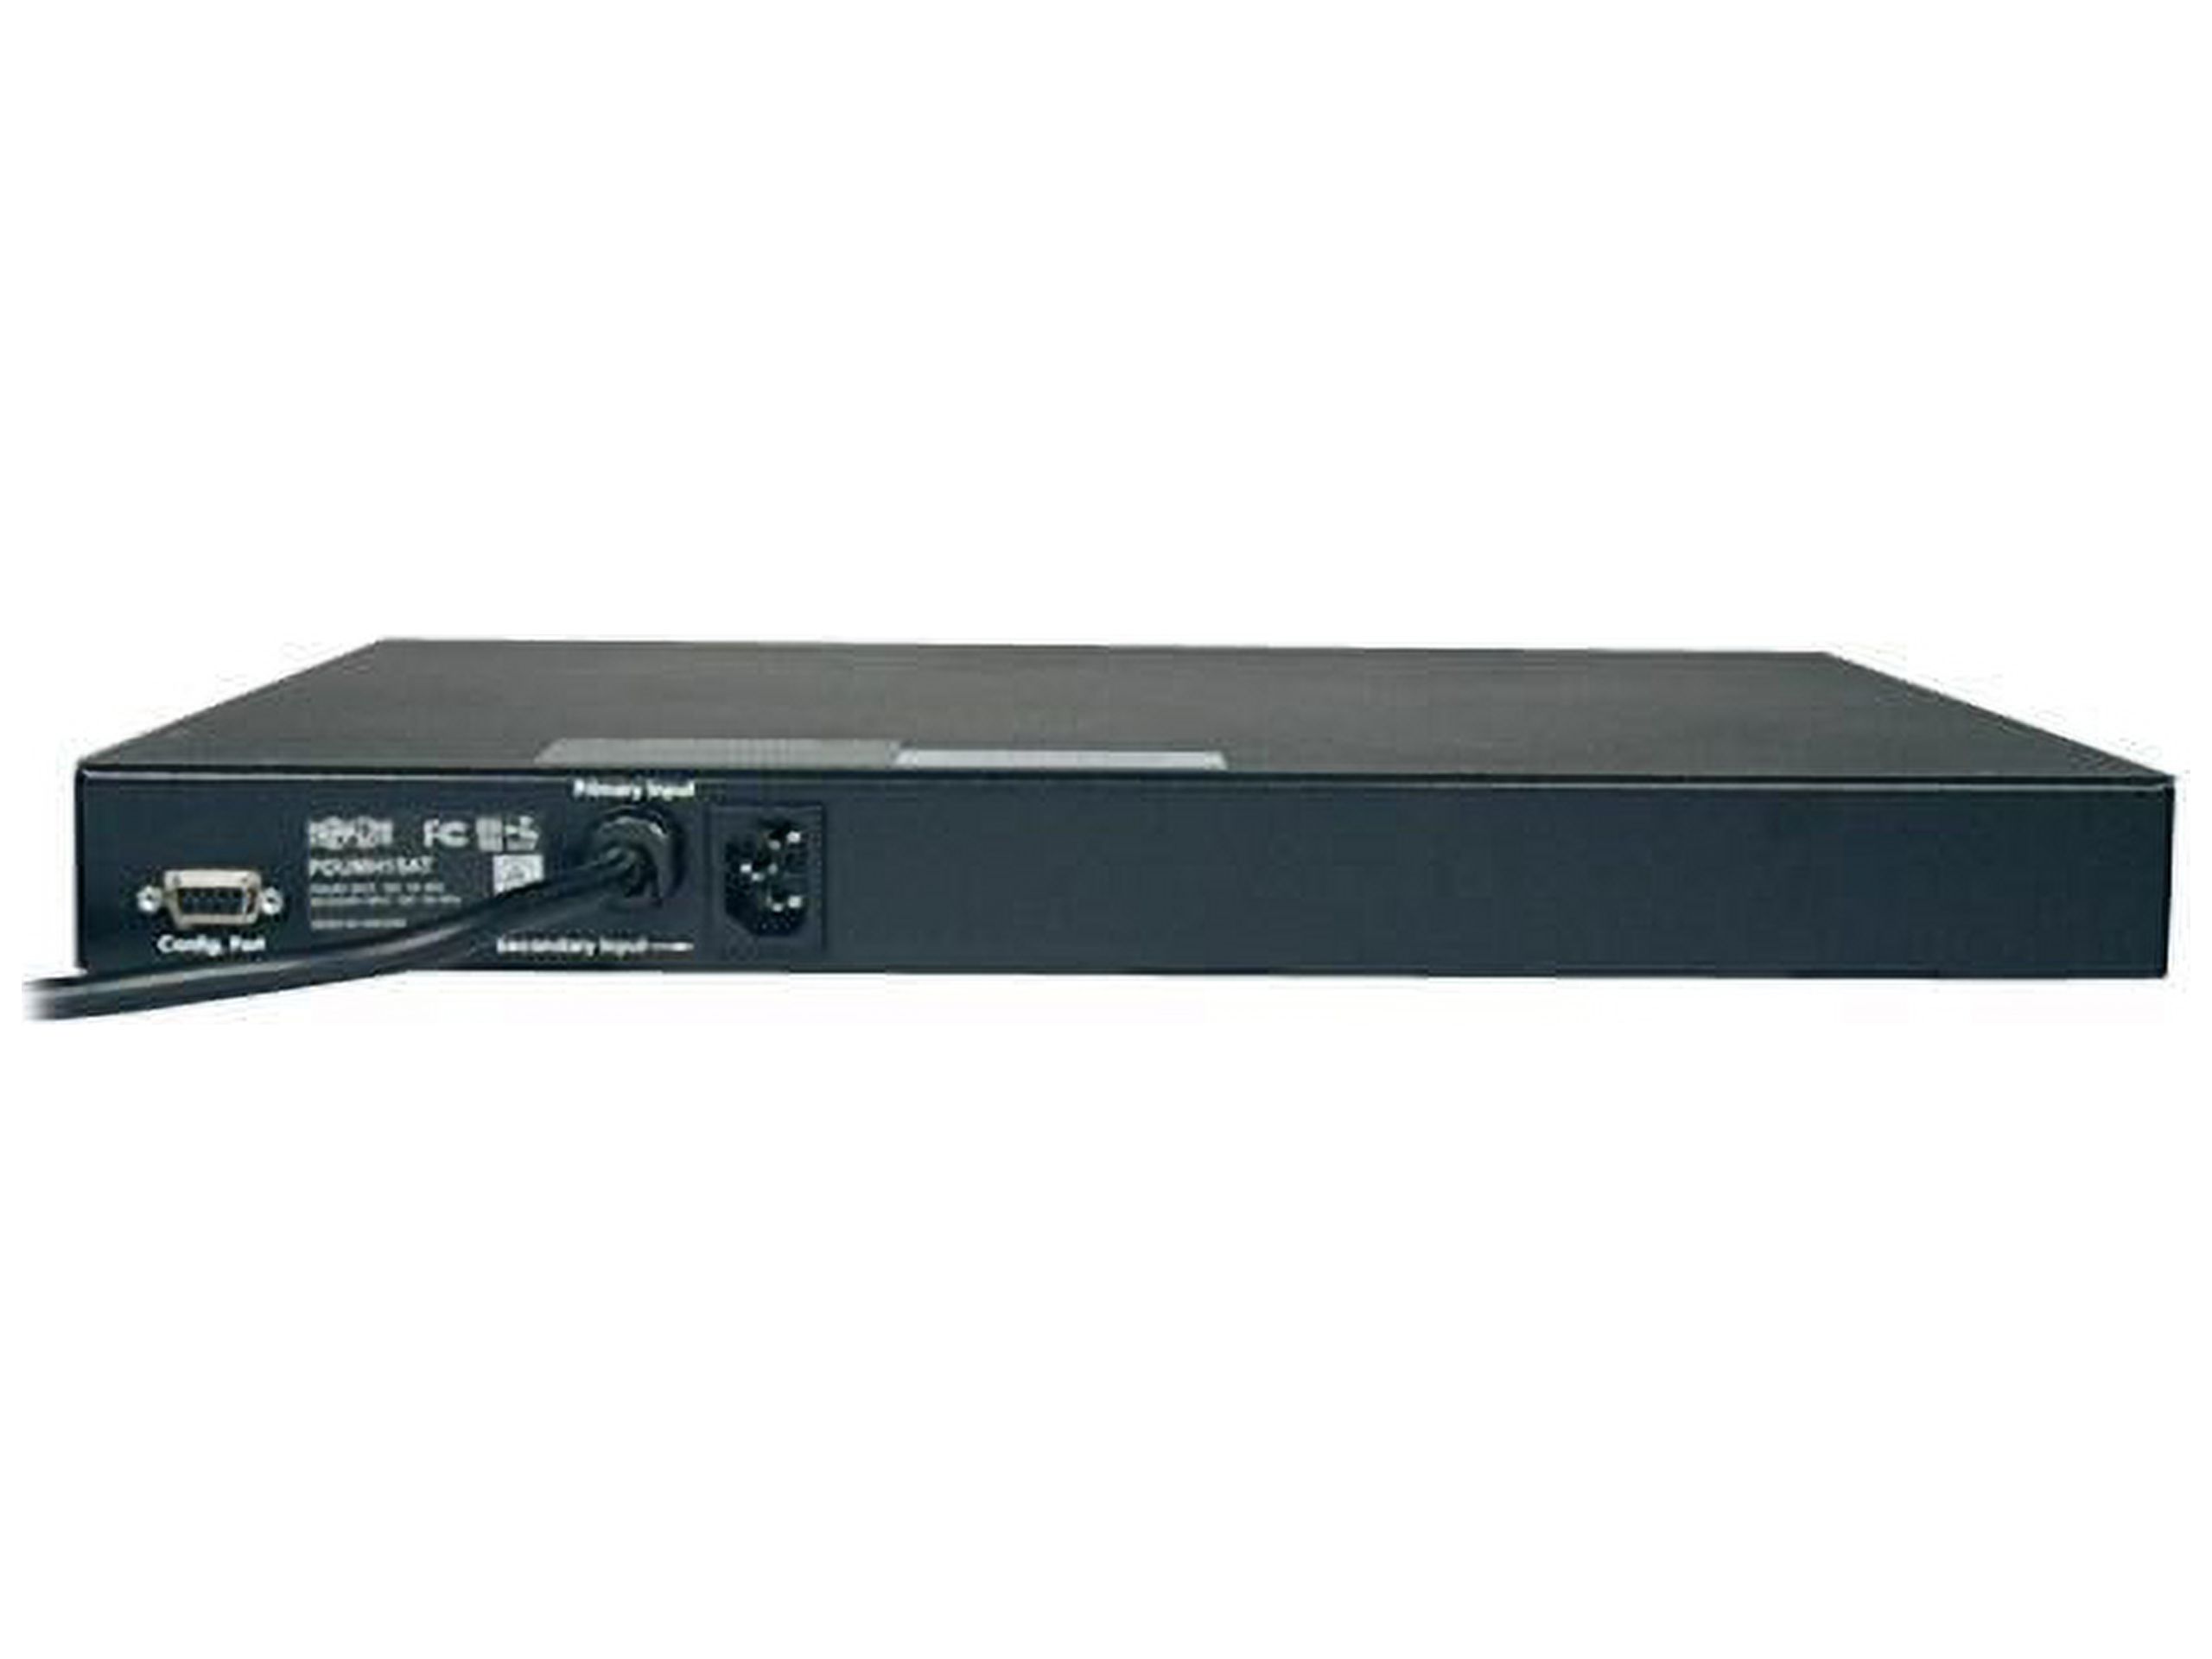 Tripp Lite Metered PDU with ATS, 15A, 8 Outlets (5-15R), 120V, 2 5-15P, 100 - 127 V Input, 2 12 ft. Cords, 1U Rack-Mount Power, TAA (PDUMH15AT) - image 2 of 3